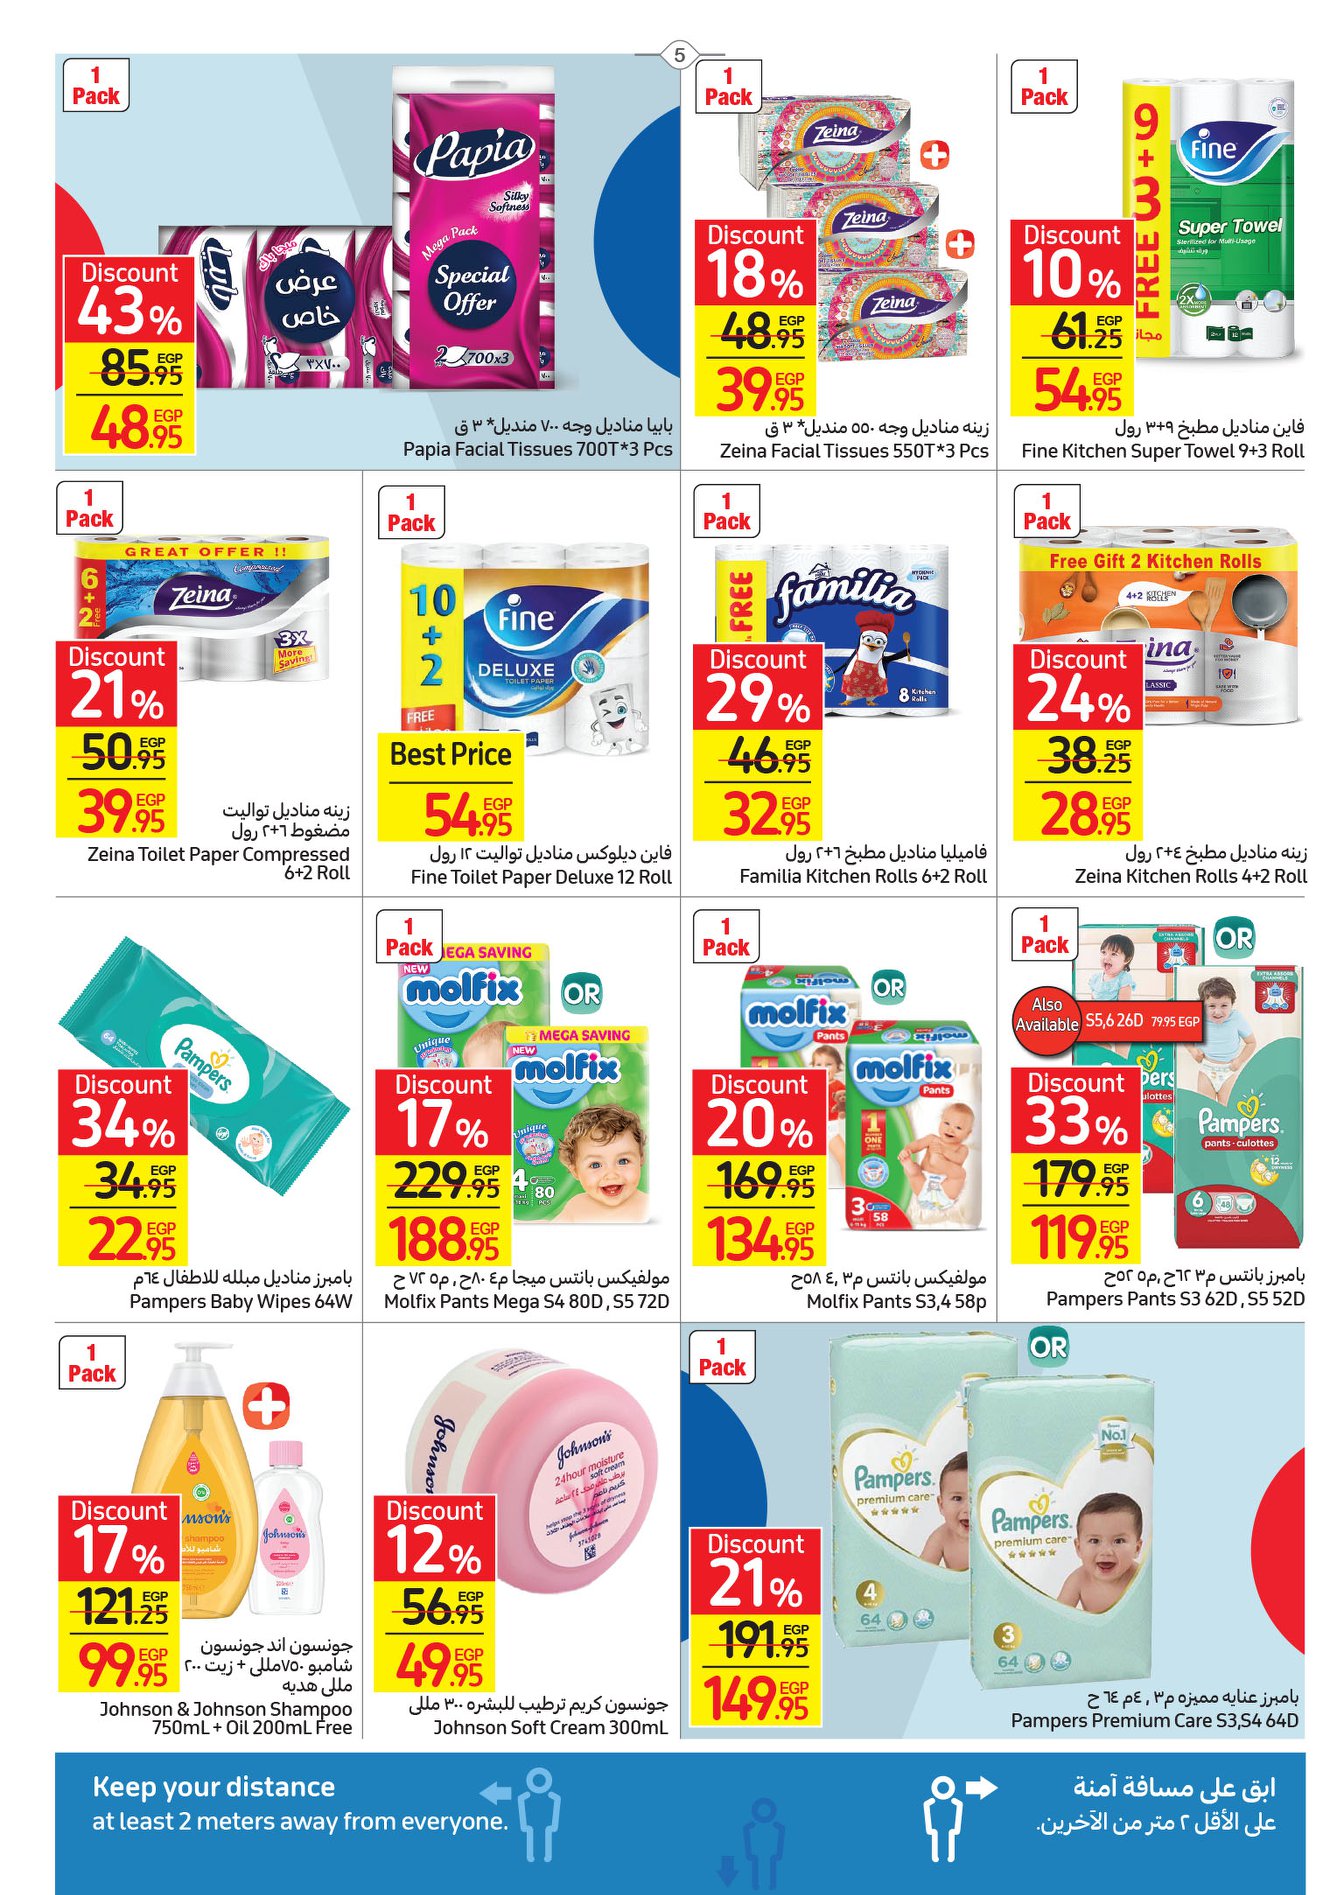 Enjoy now the strongest Carrefour offers from 17 to 25 April 2022.. Huge discounts on home essentials 20